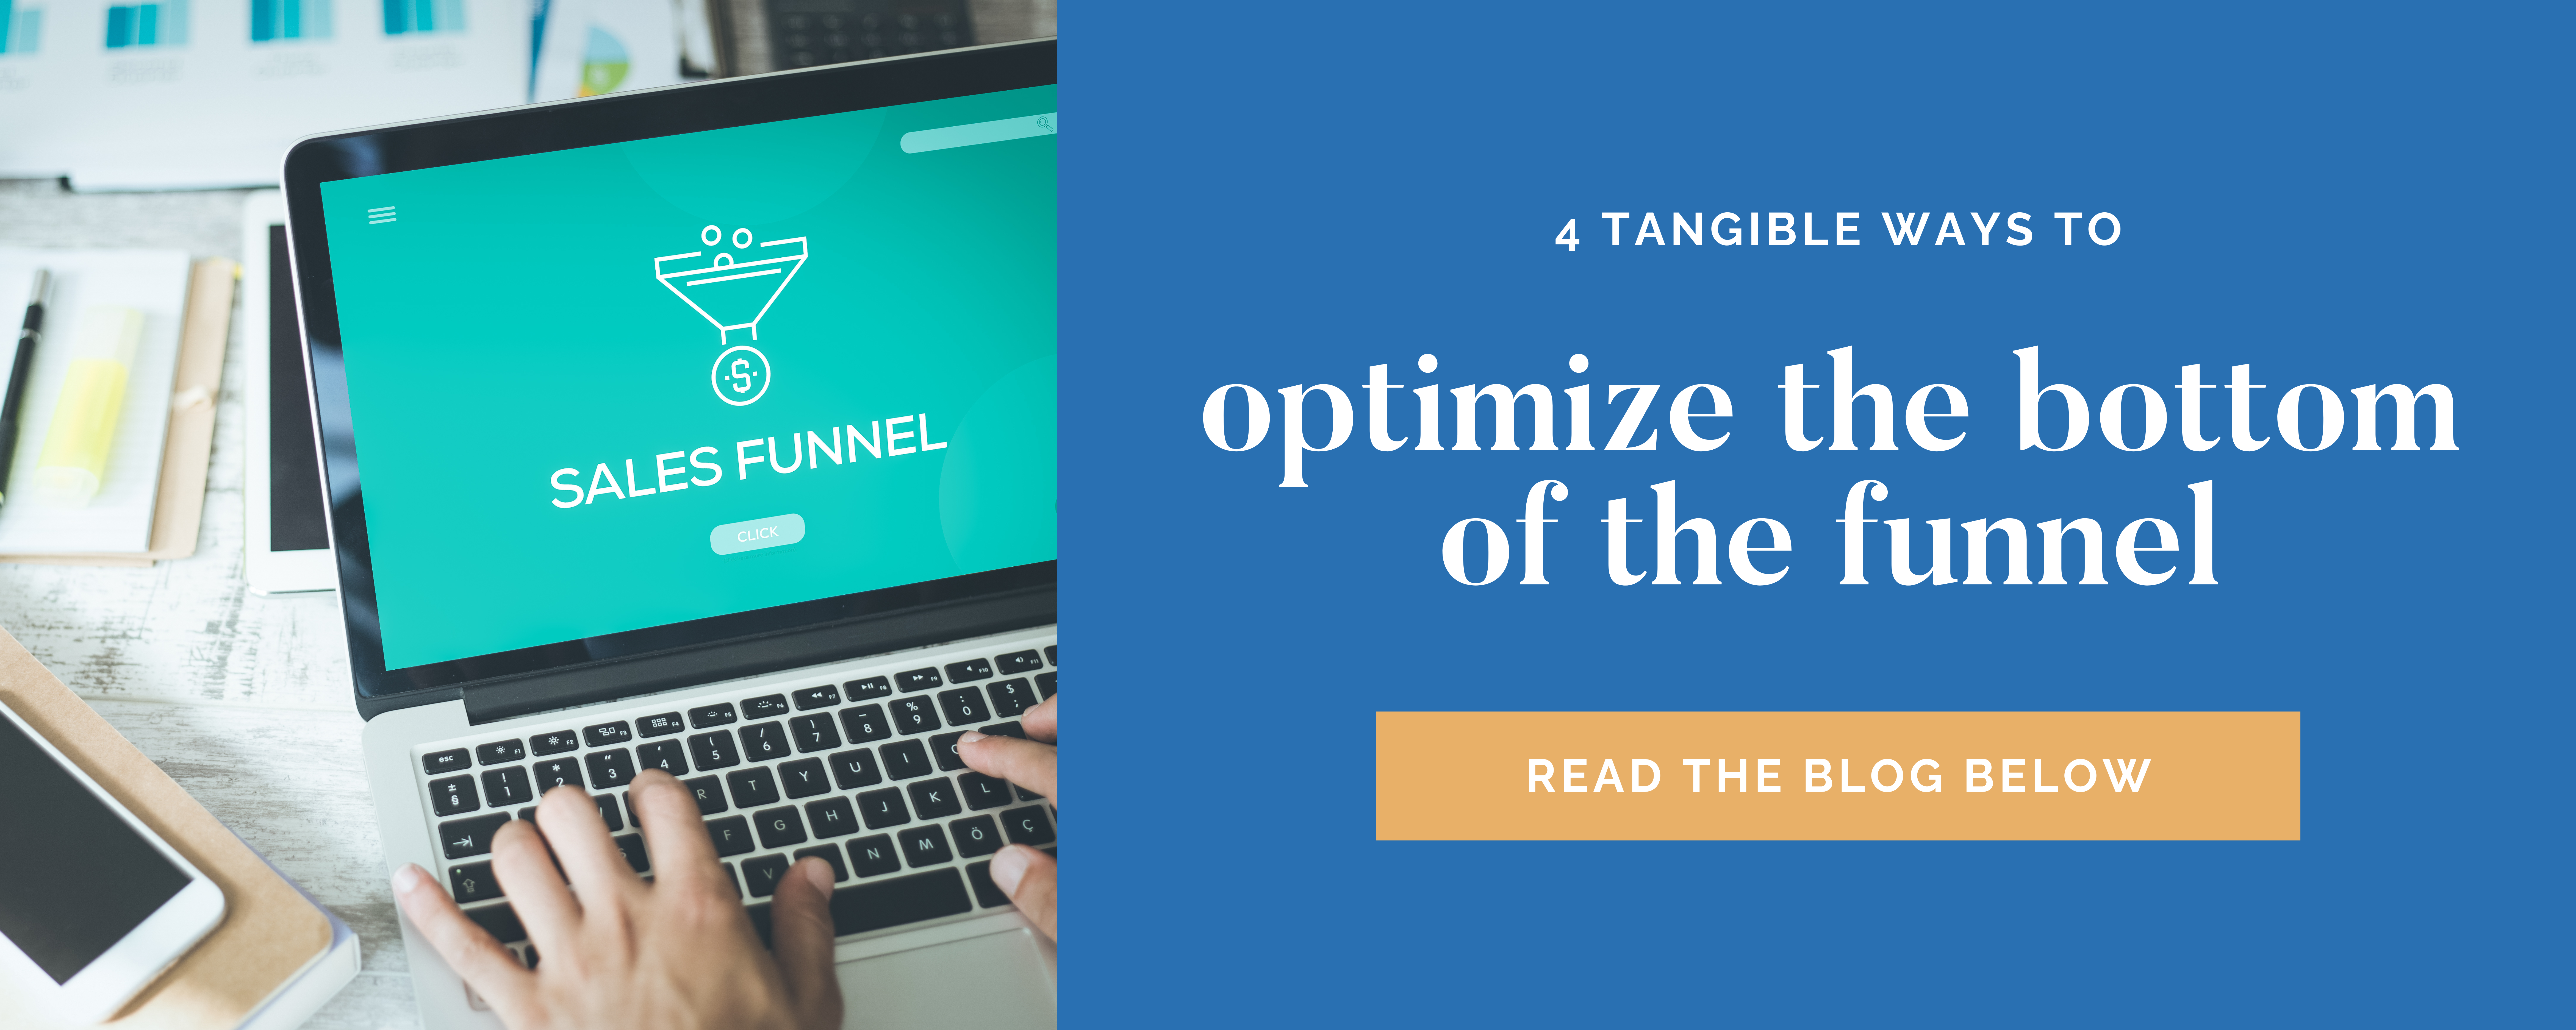 4_tangible_ways_to_optimize_the_bottom_of_the_digital_sales_funnel_blog_post